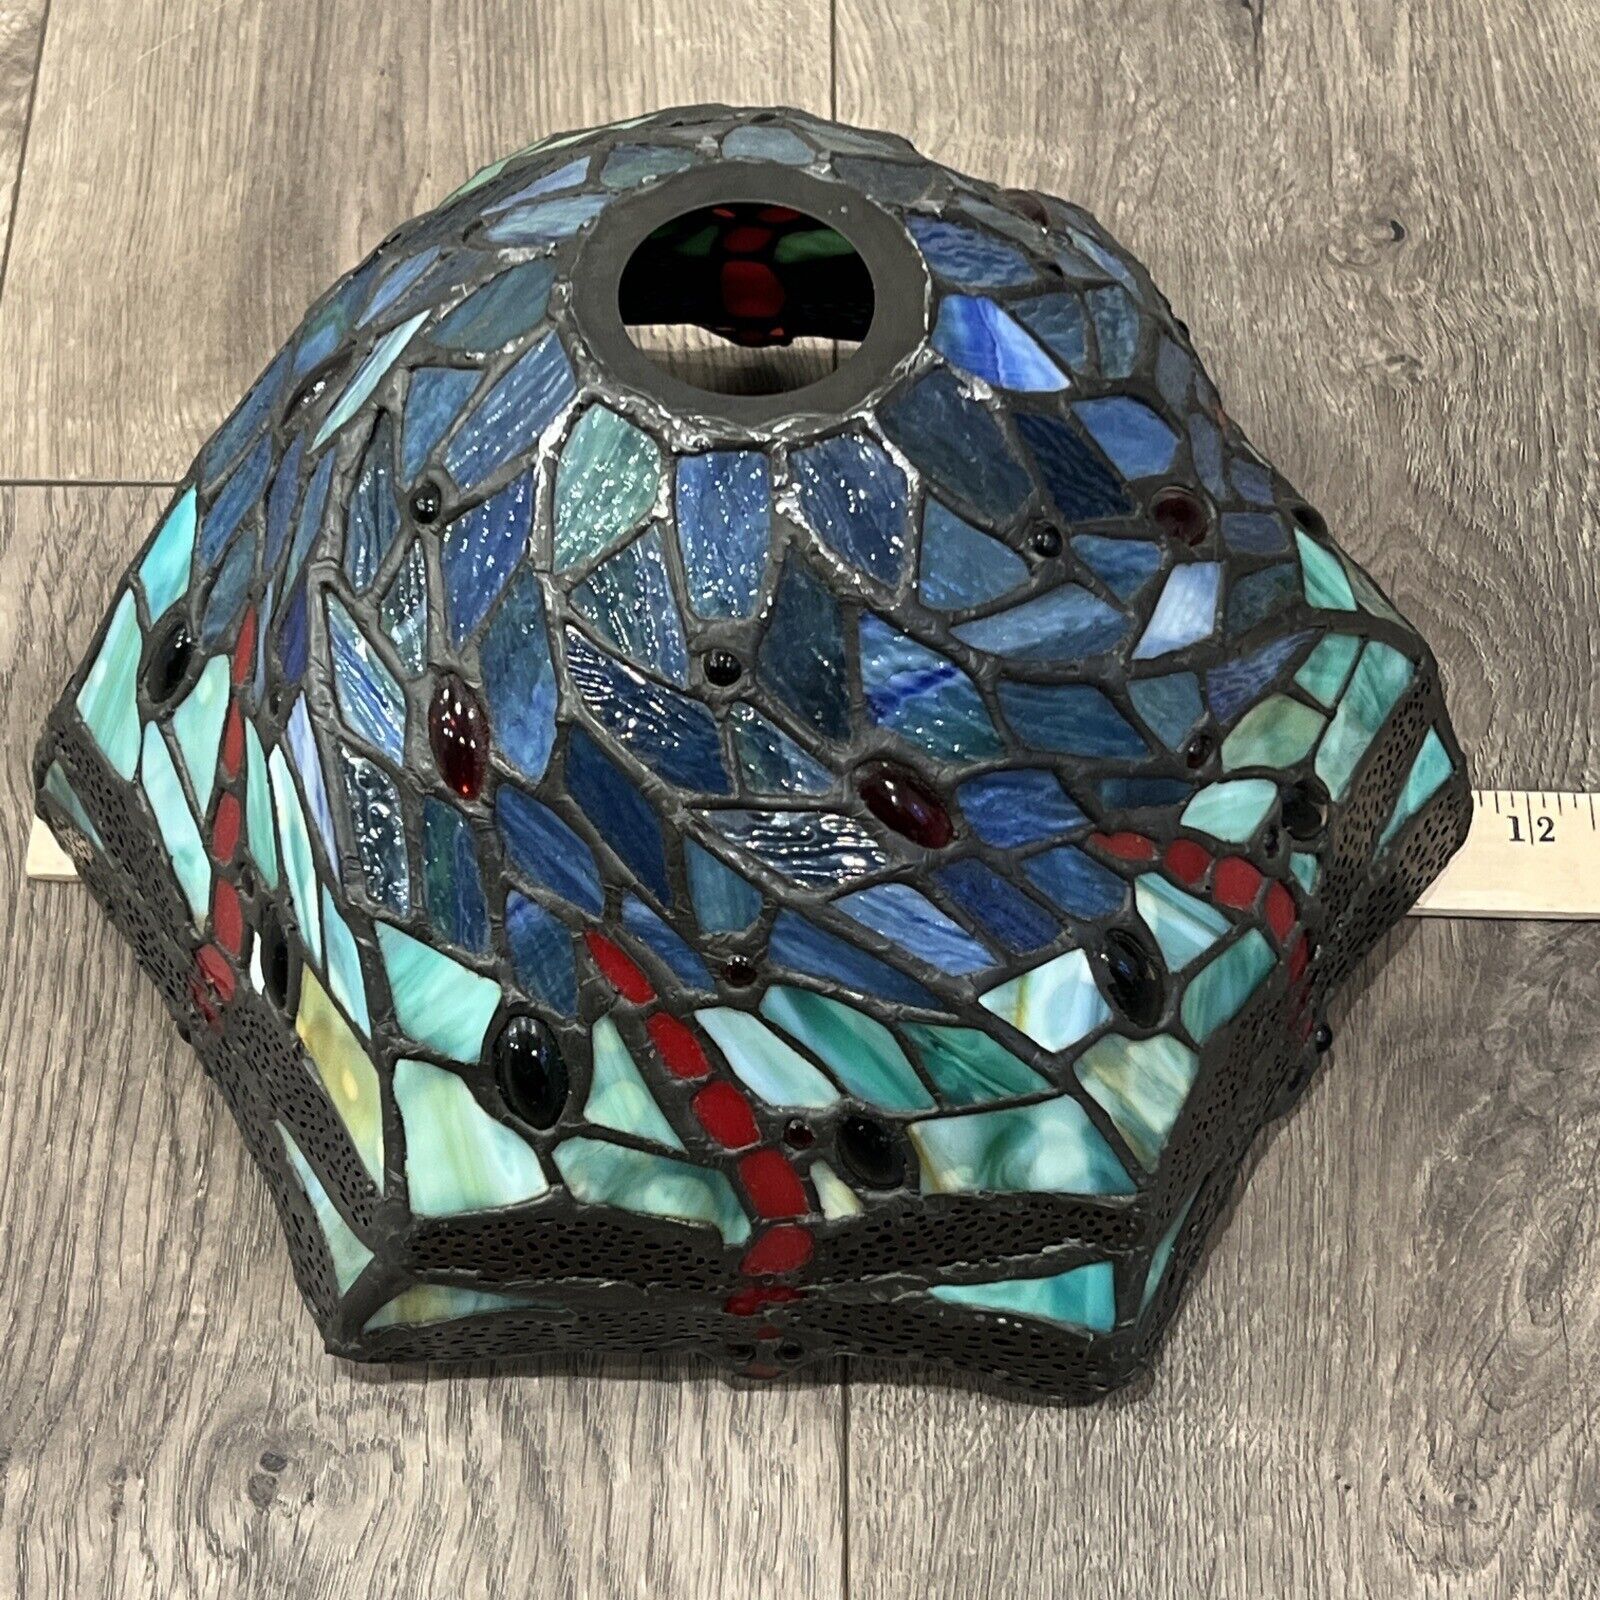 VTG Dale Tiffany dragonfly stained glass lamp shade Hexagon Signed 11.5” x 7”